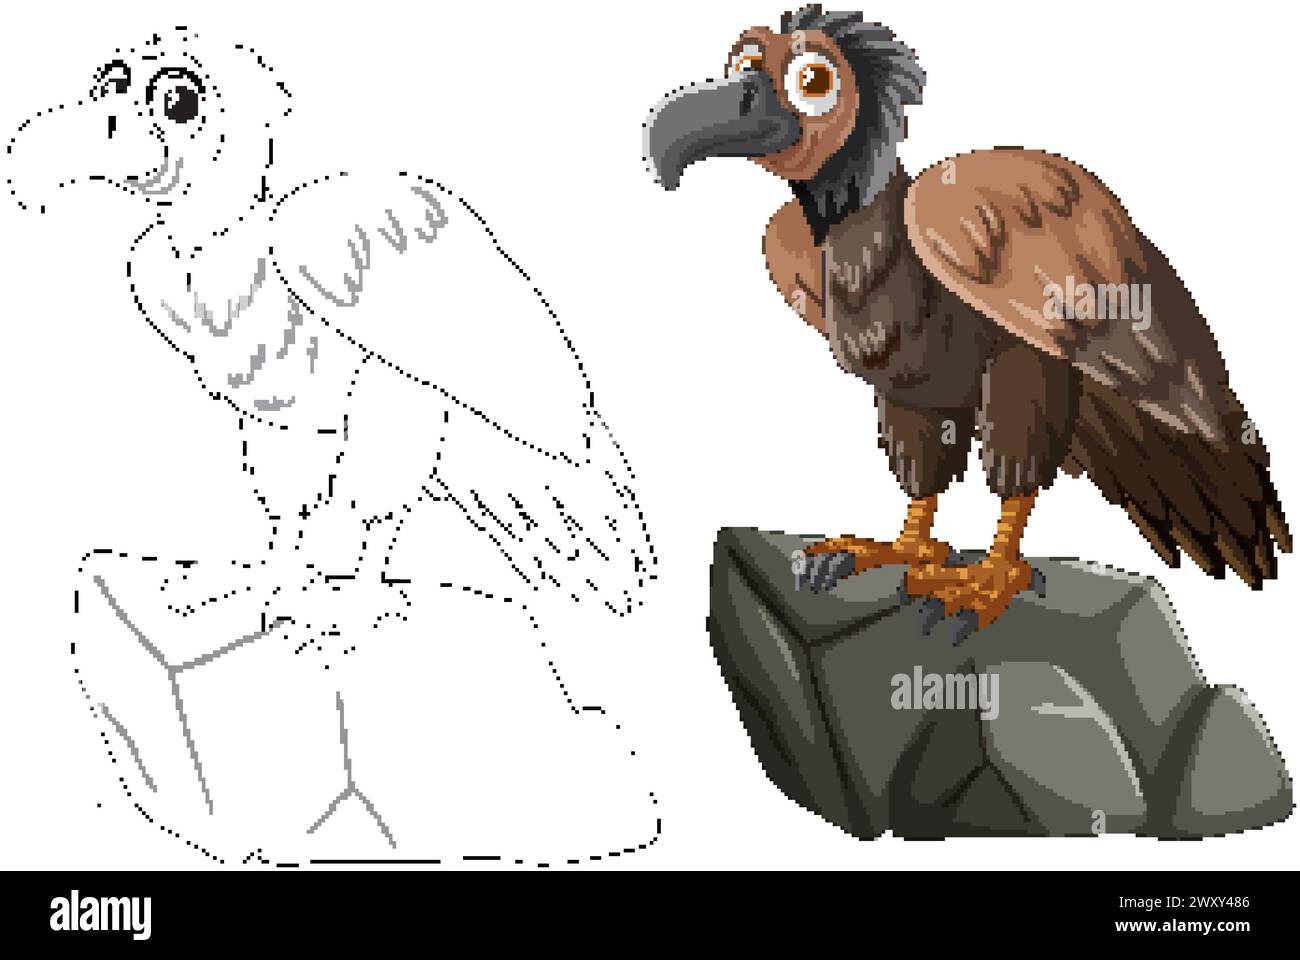 Two vultures, one sketched and one colored, on rocks. Stock Vector